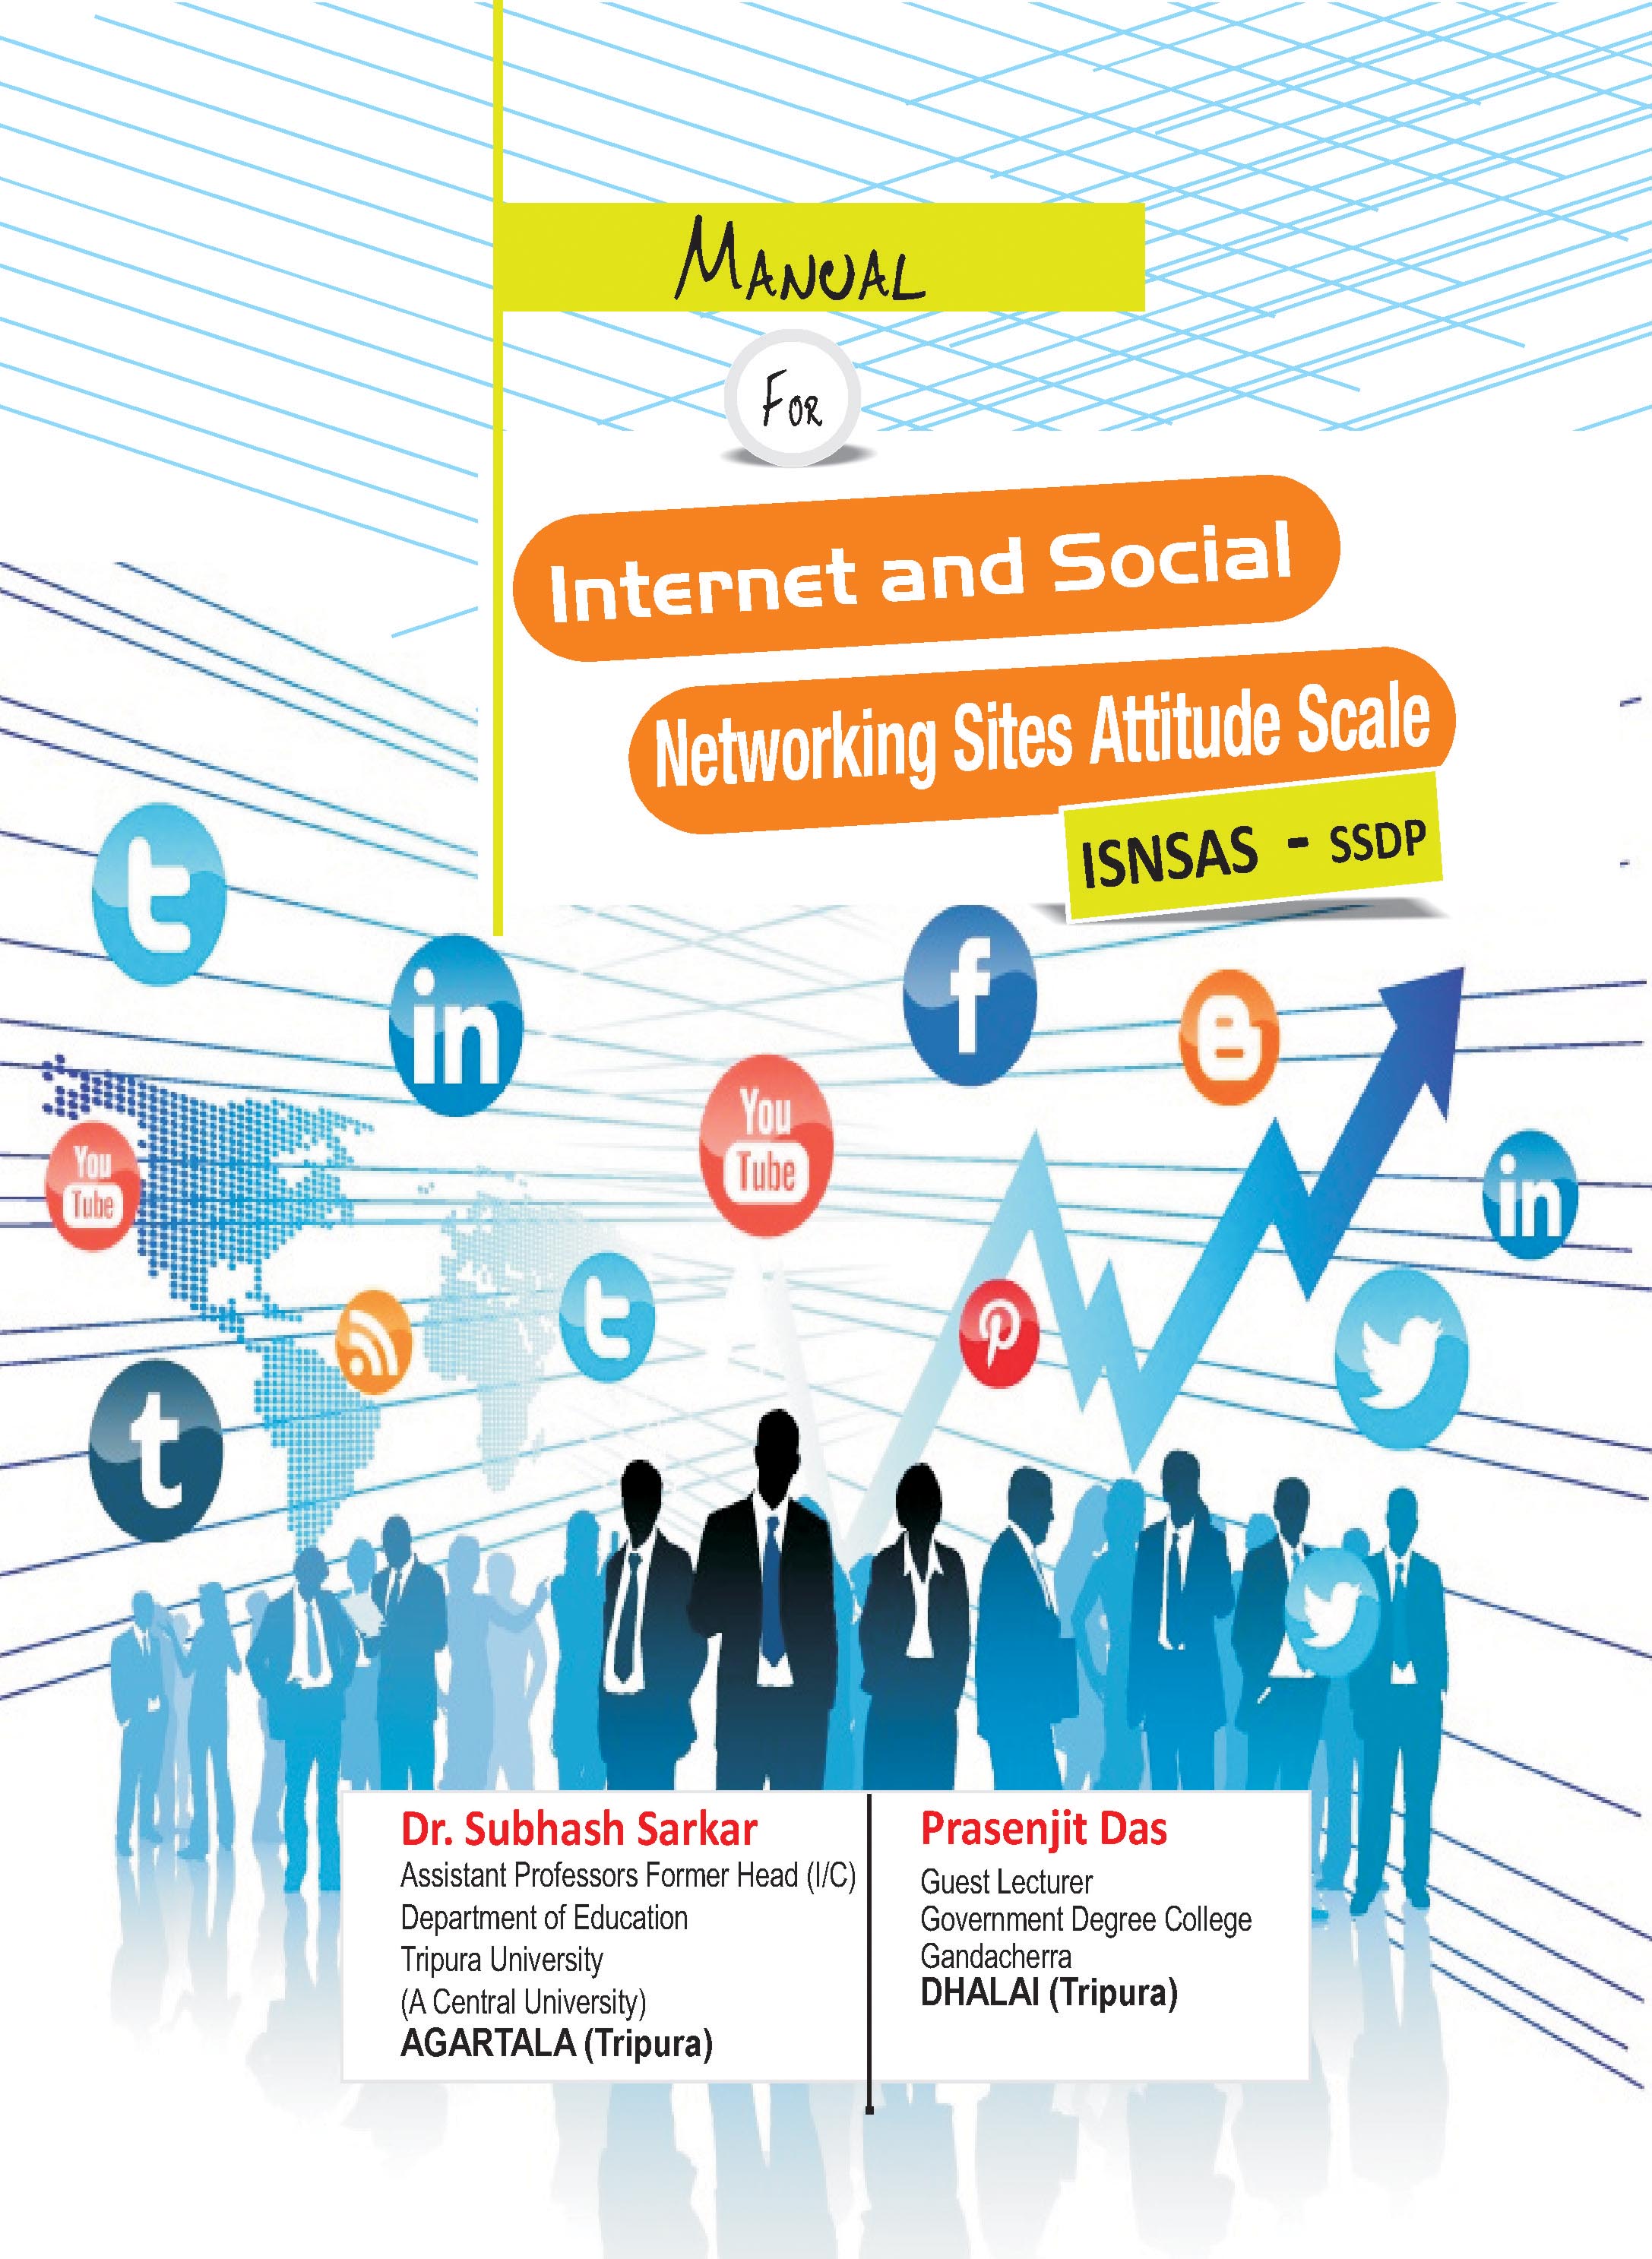 INTERNET-AND-SOCIAL-NETWORKING-SITES-ATTITUDE-SCALE